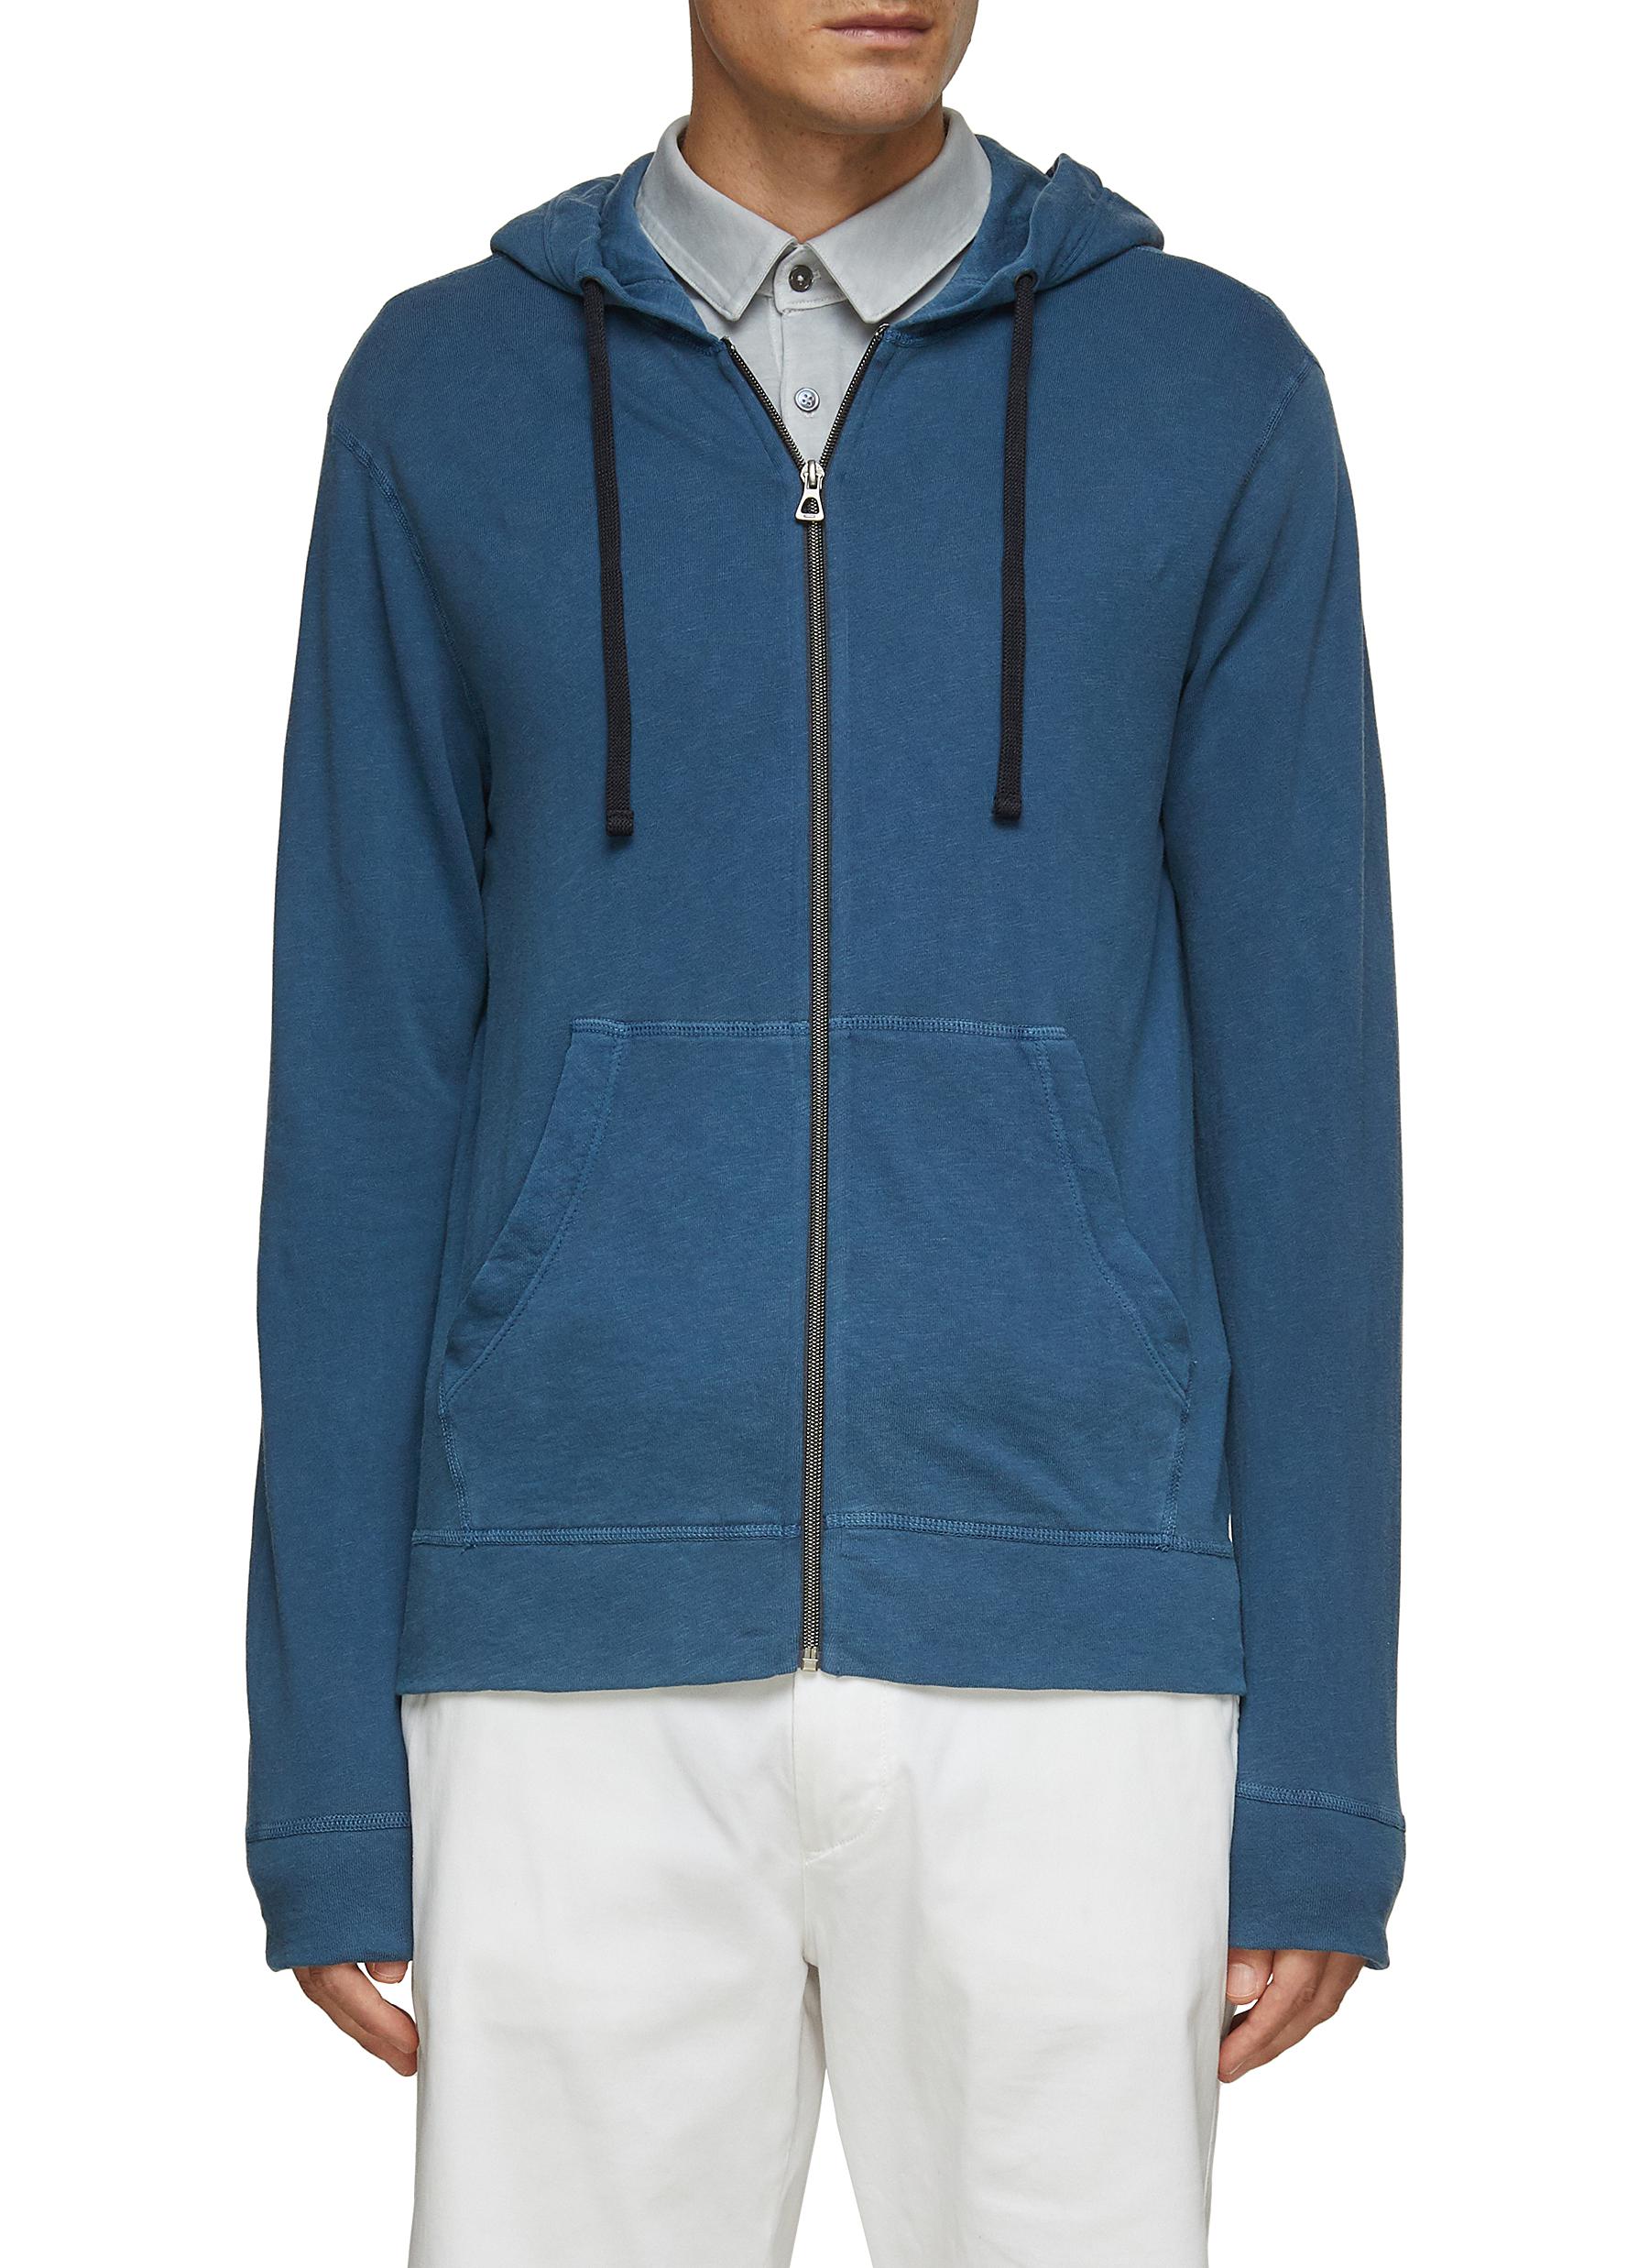 JAMES PERSE VINTAGE COTTON FRENCH TERRY ZIPPED HOODIE